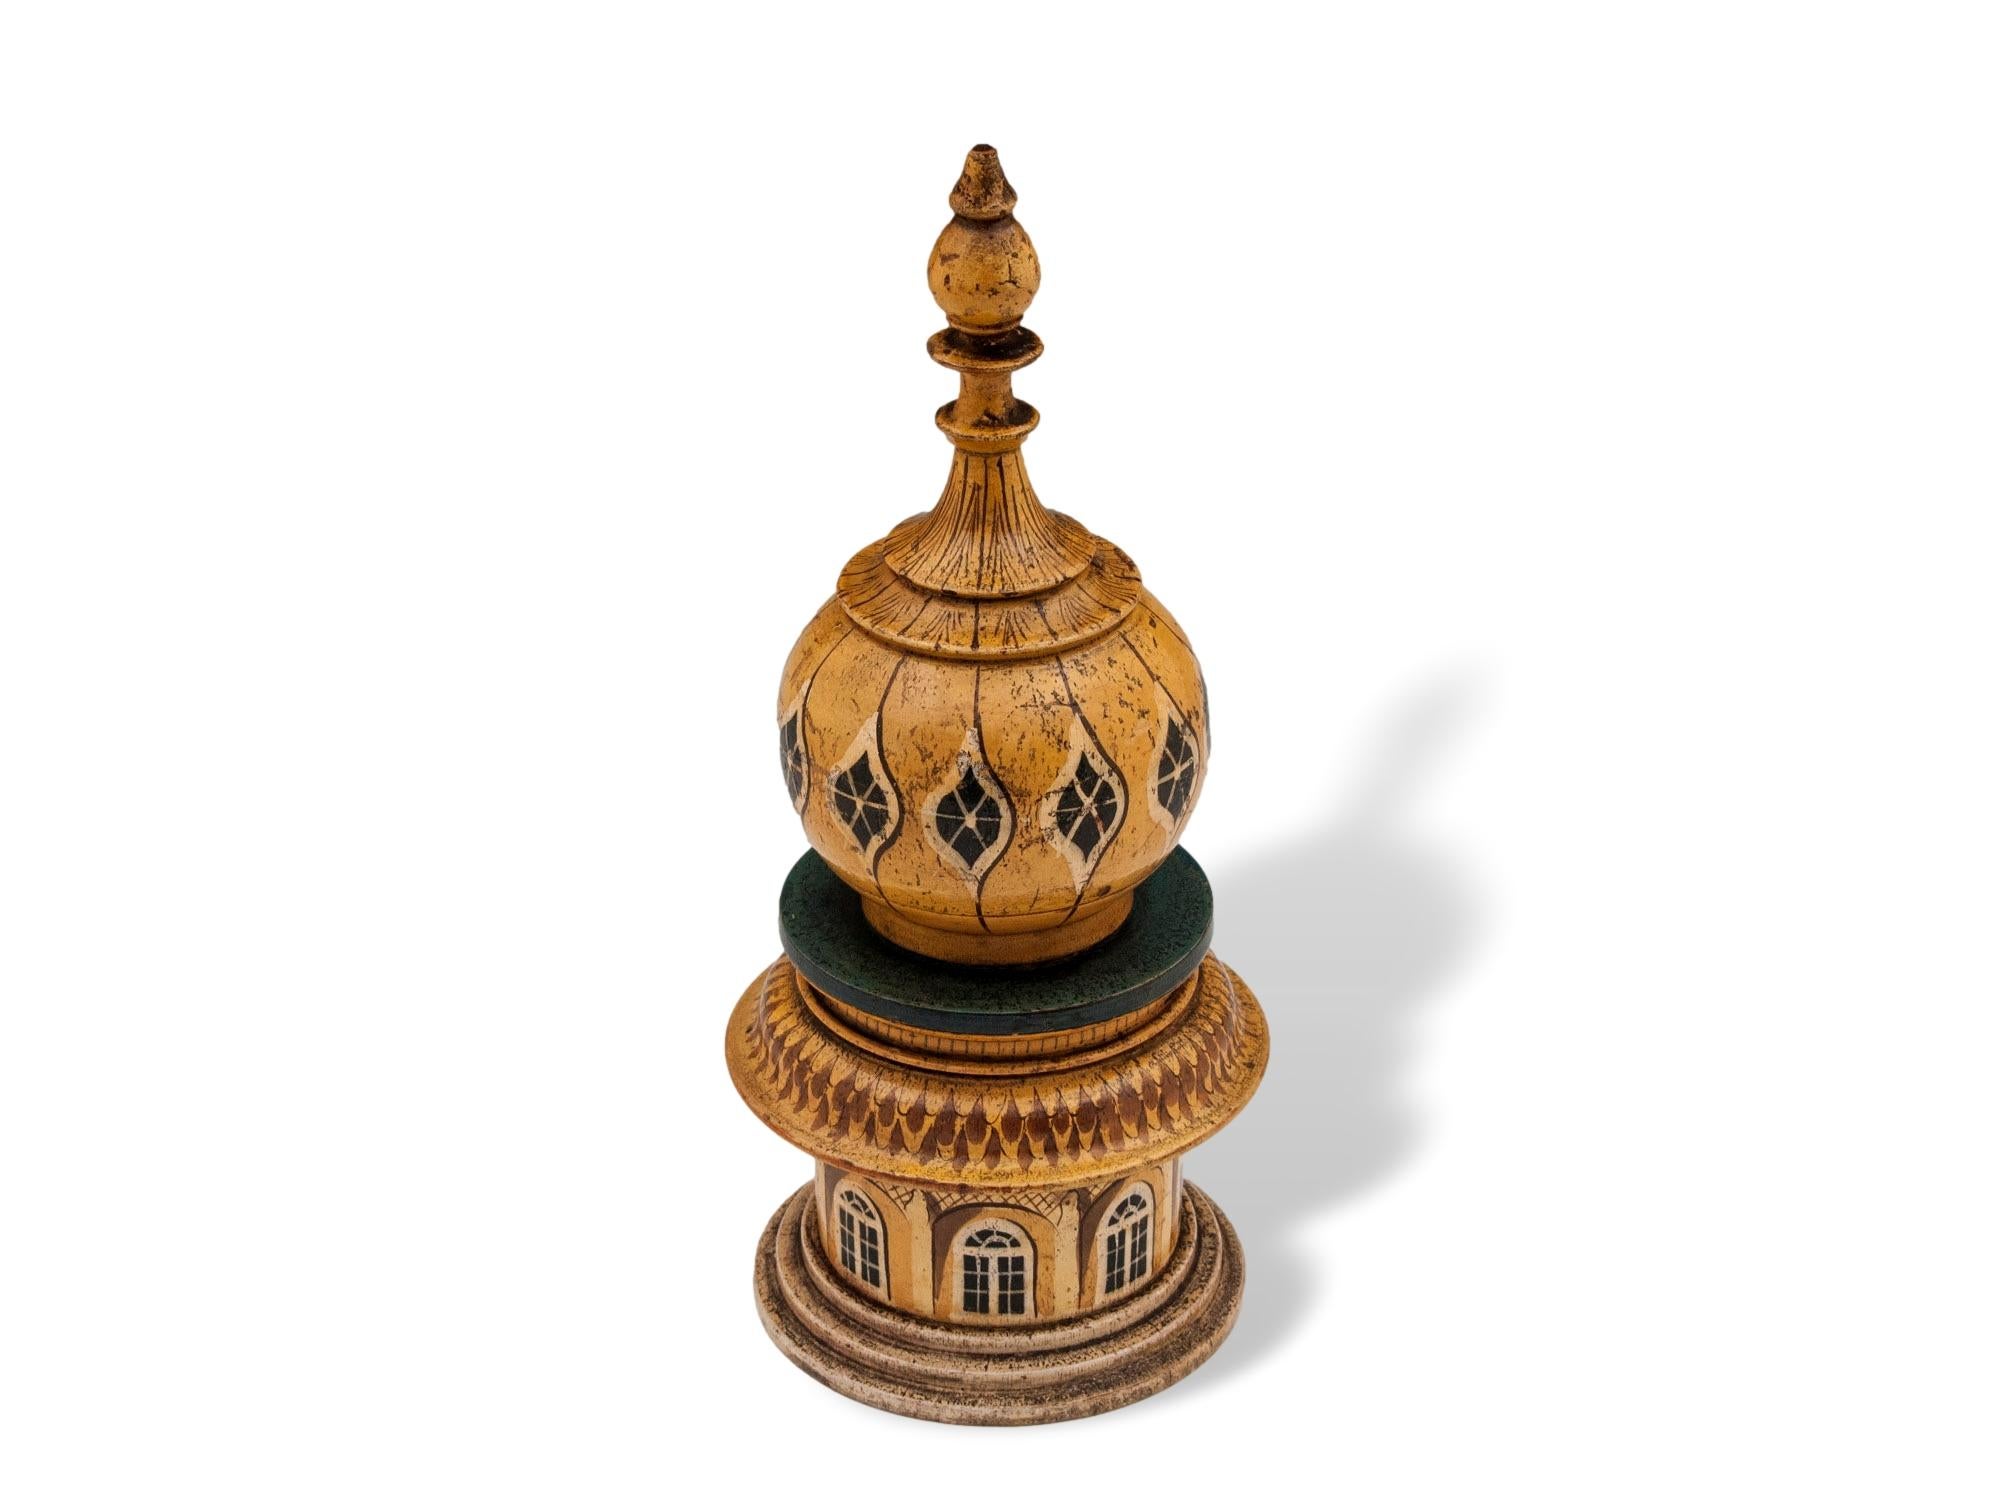 Rare Tunbridge Ware Form Sewing Compendium

From our Tunbridge Ware collection, we are delighted to offer this very rare Tunbridge Wear Sewing Compendium. The Sewing Compendium modelled as a tower from the Brighton Pavilion features the iconic